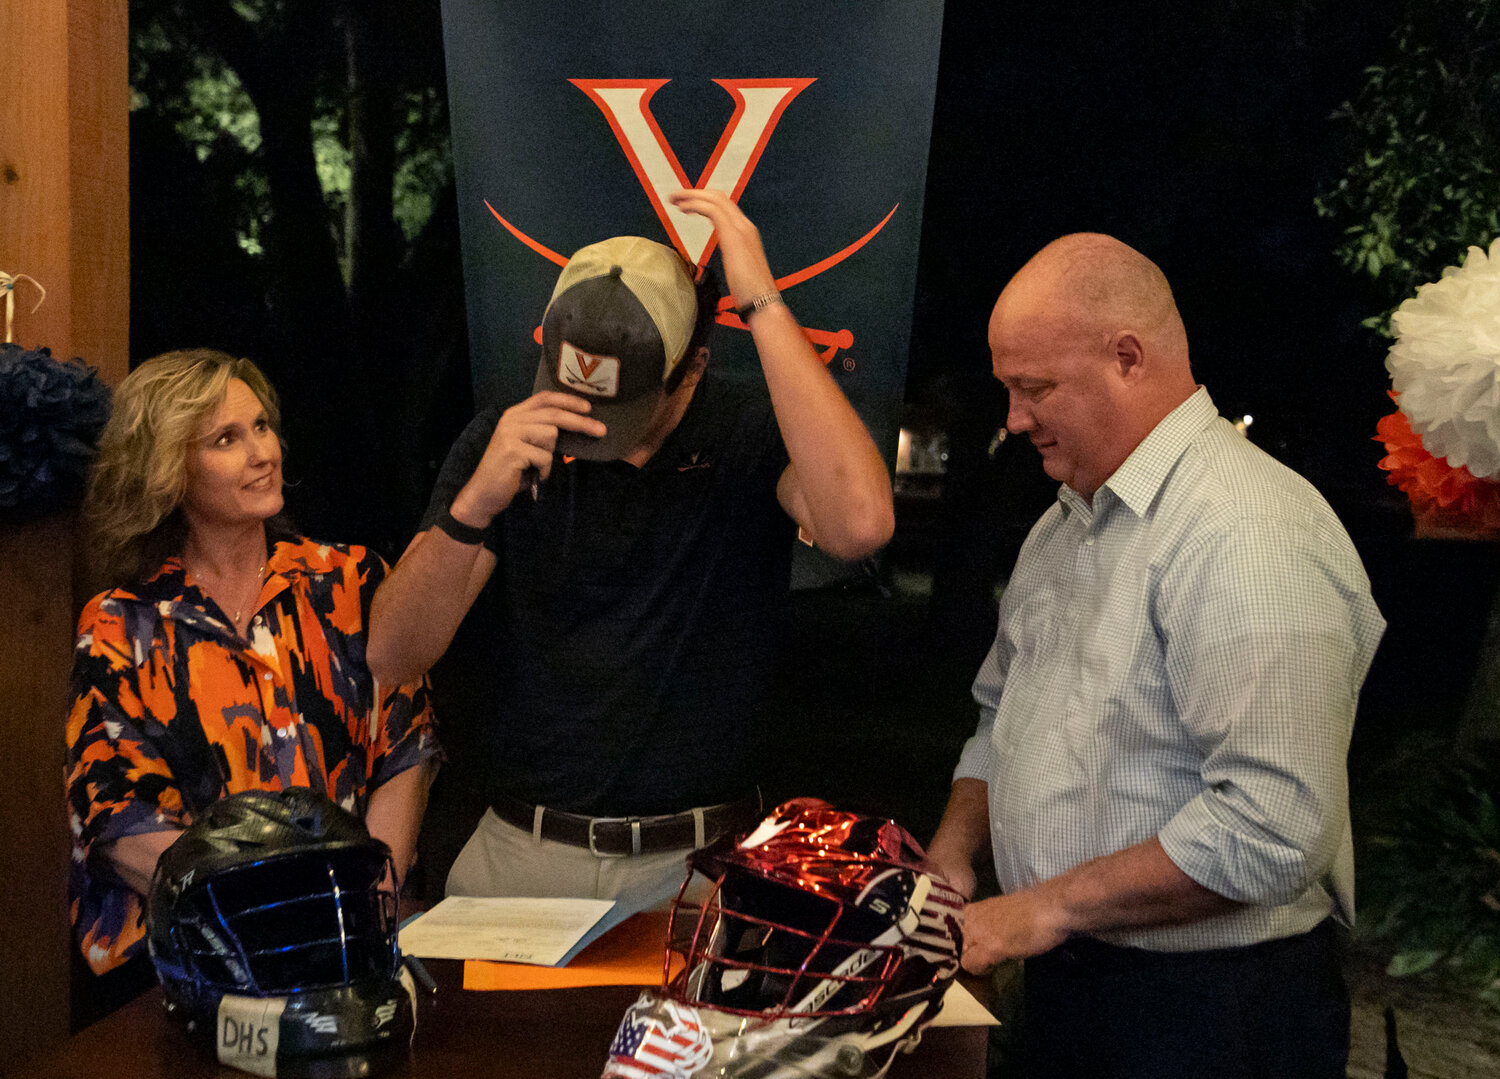 The newest Virginia Cavalier lacrosse player comes from Daphne, Alabama where Troy Capstraw signed his National Letter of Intent on Wednesday, Nov. 8. Capstraw was joined by friends and family in celebrating the occasion.